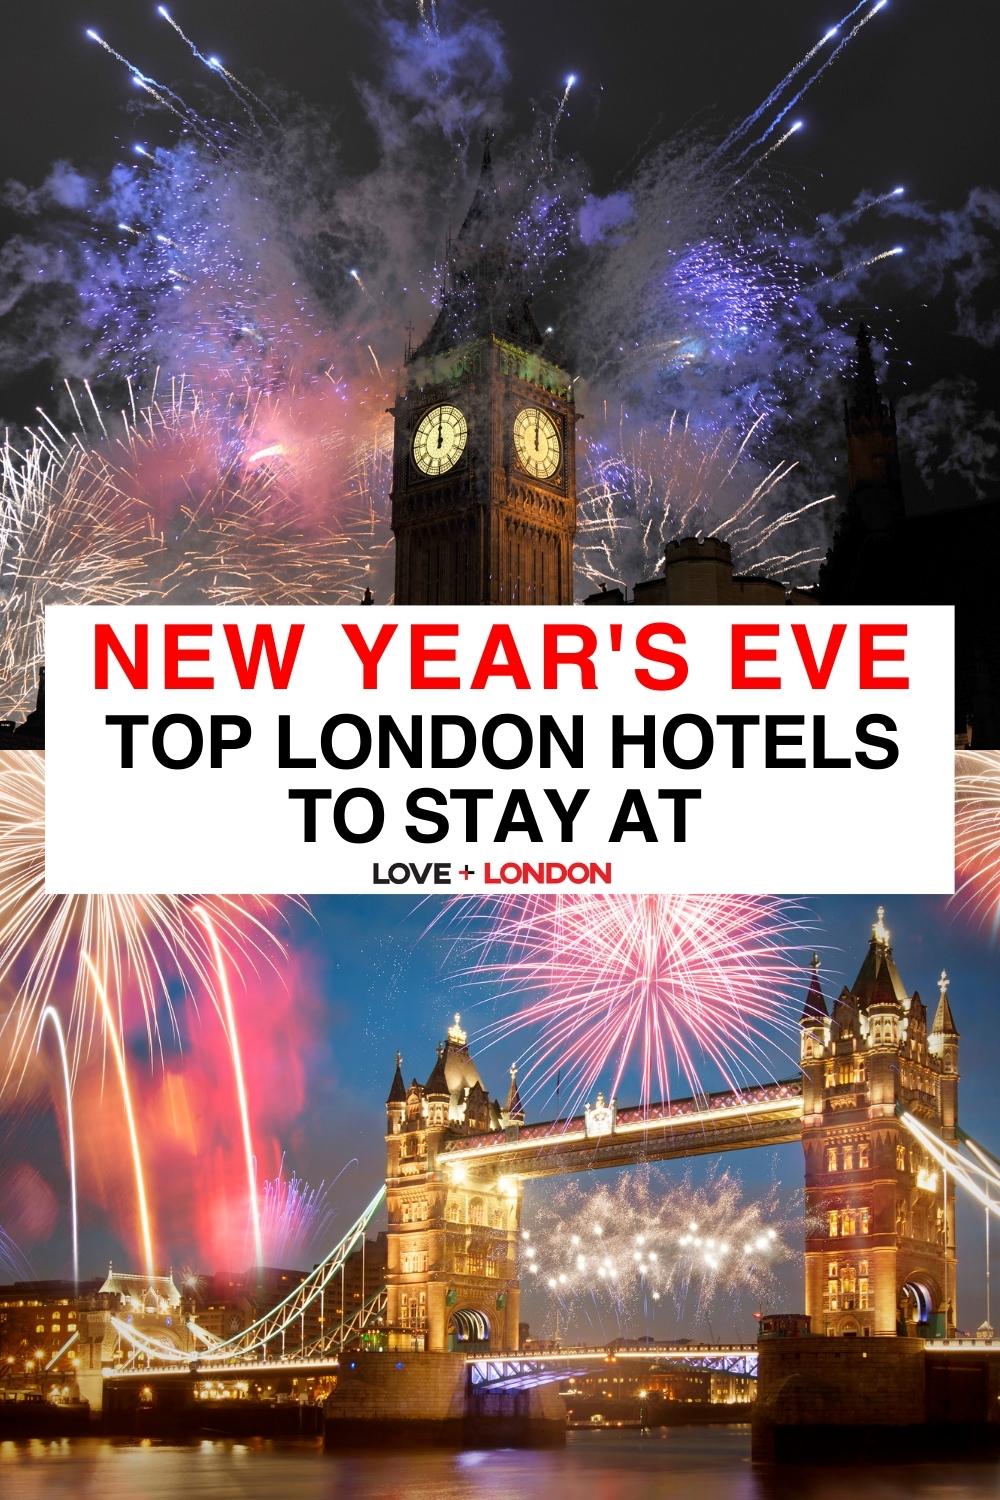 Top London Hotels to Stay at on New Year's Eve